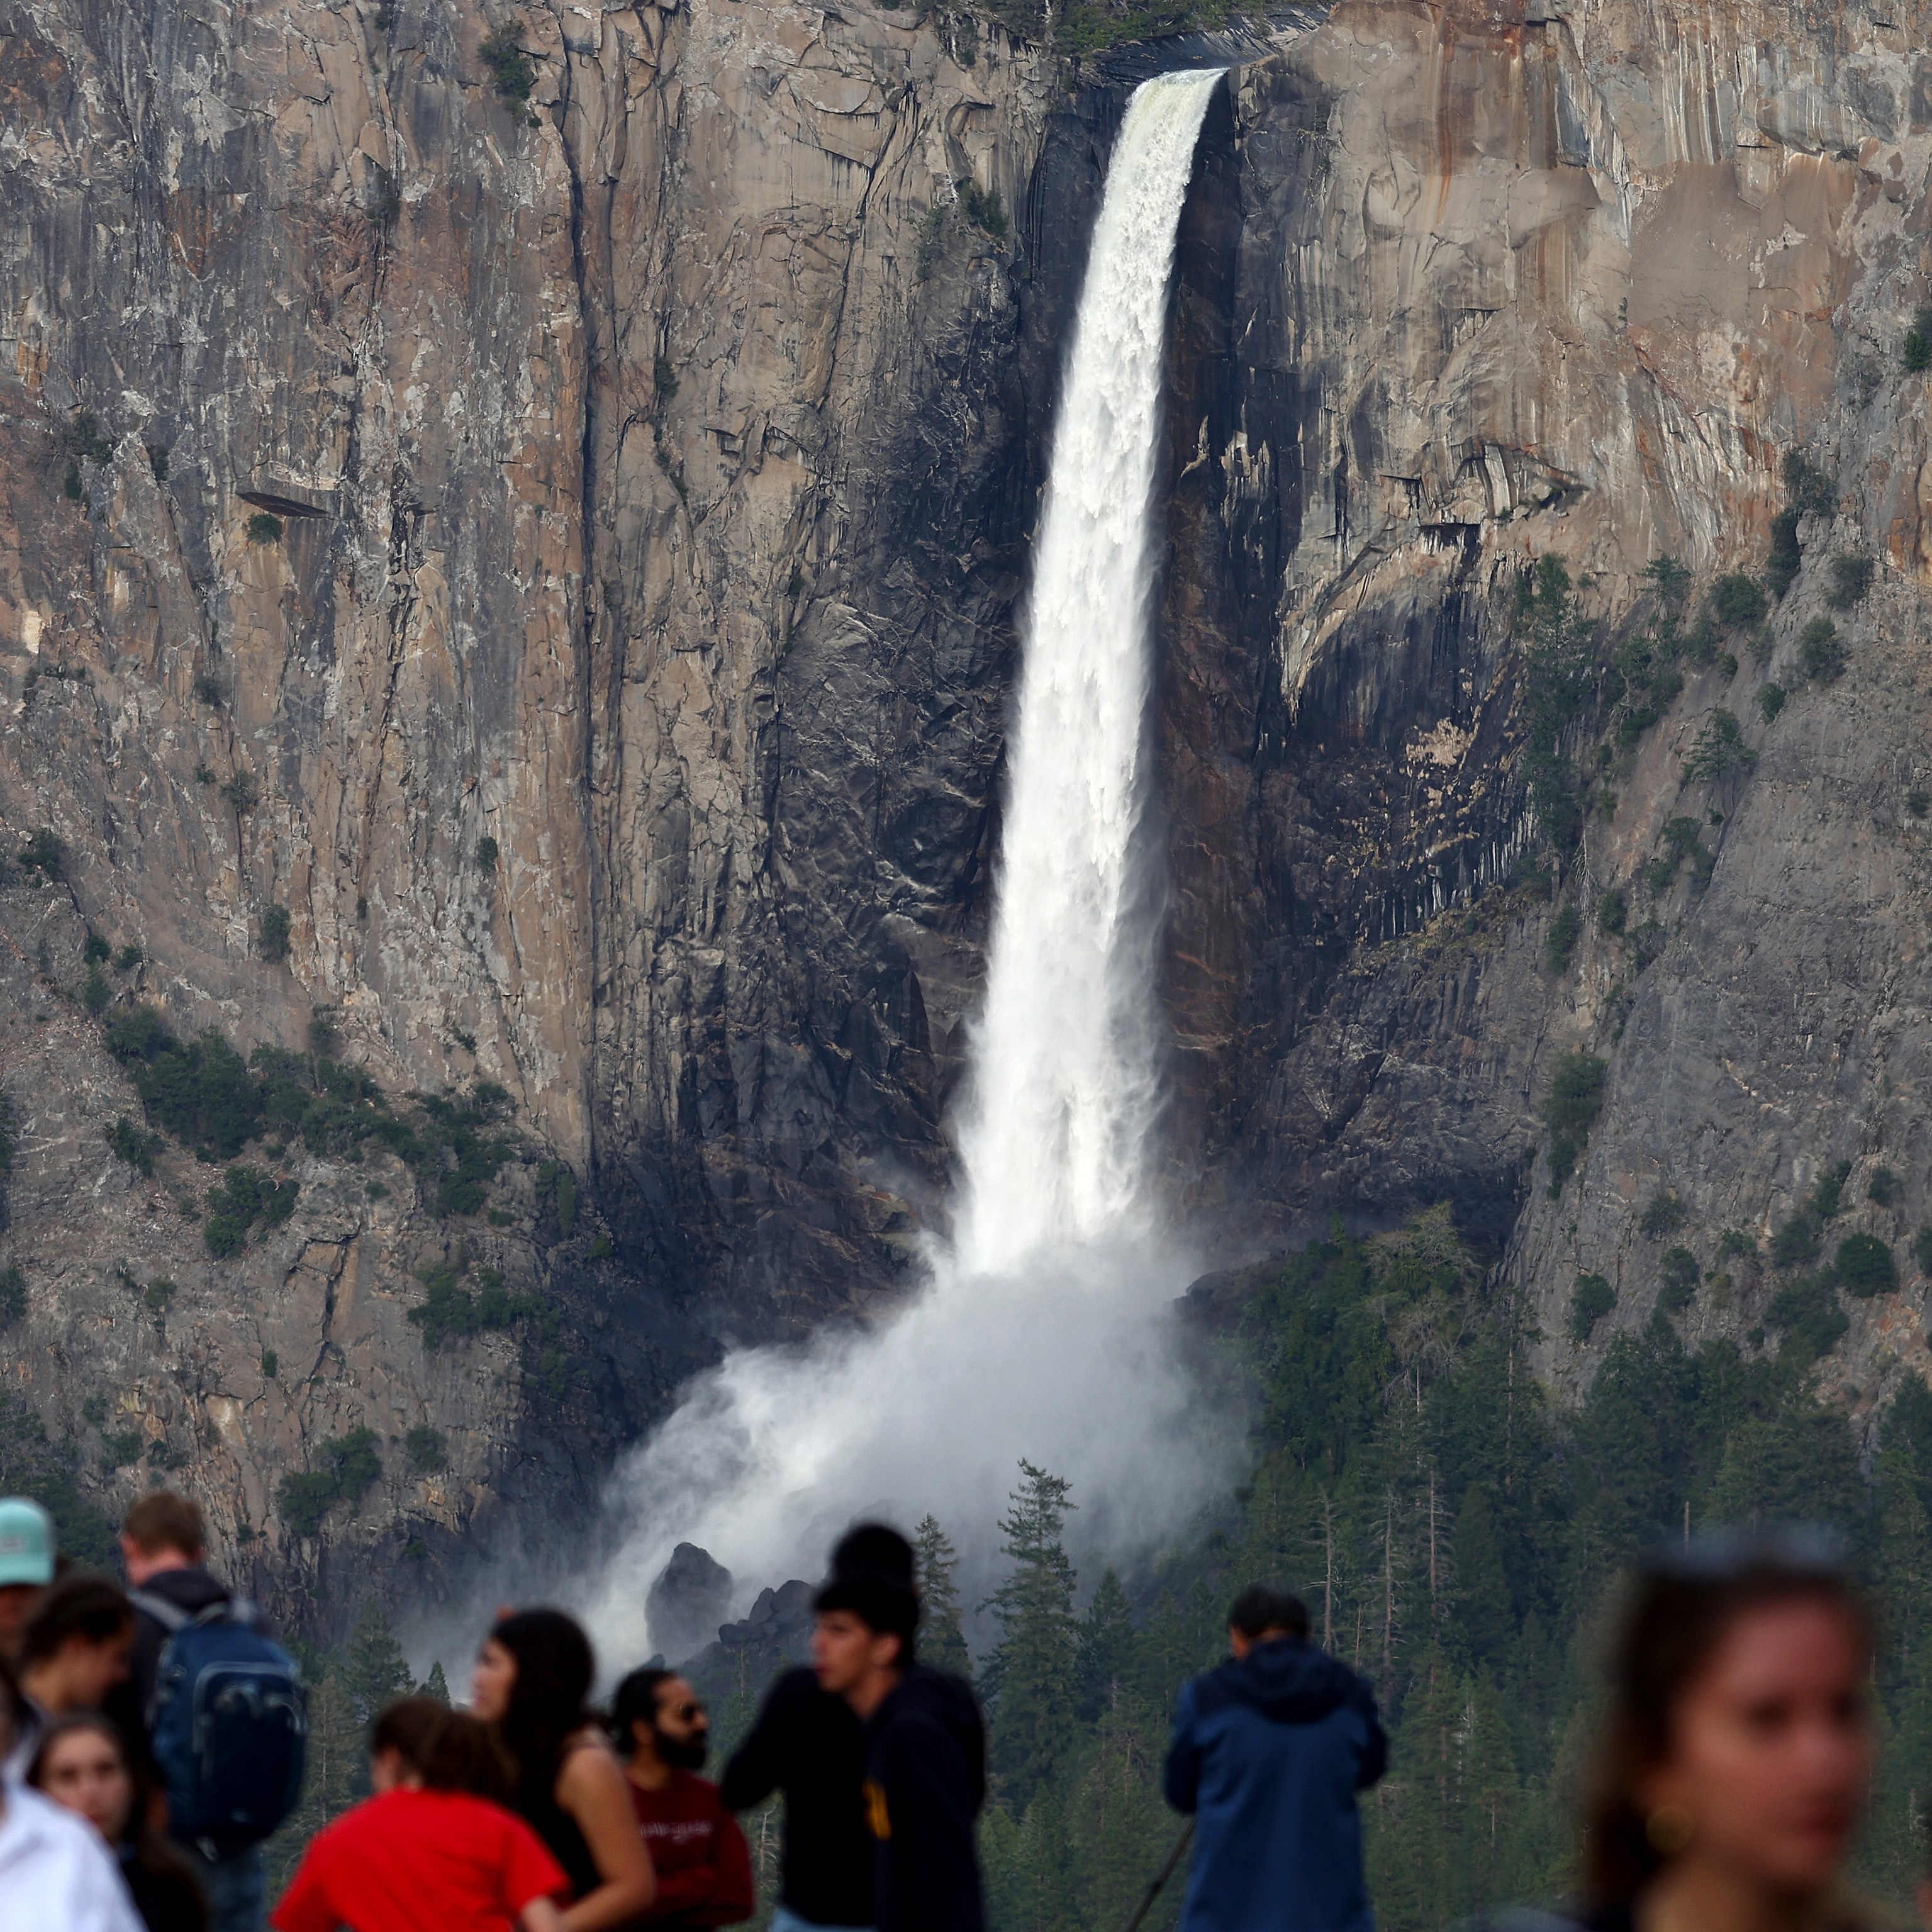 A tall waterfall cascades down a rugged cliffside with mist rising at its base. In the foreground, a crowd of people gathers, partially blurred, observing the scenery.